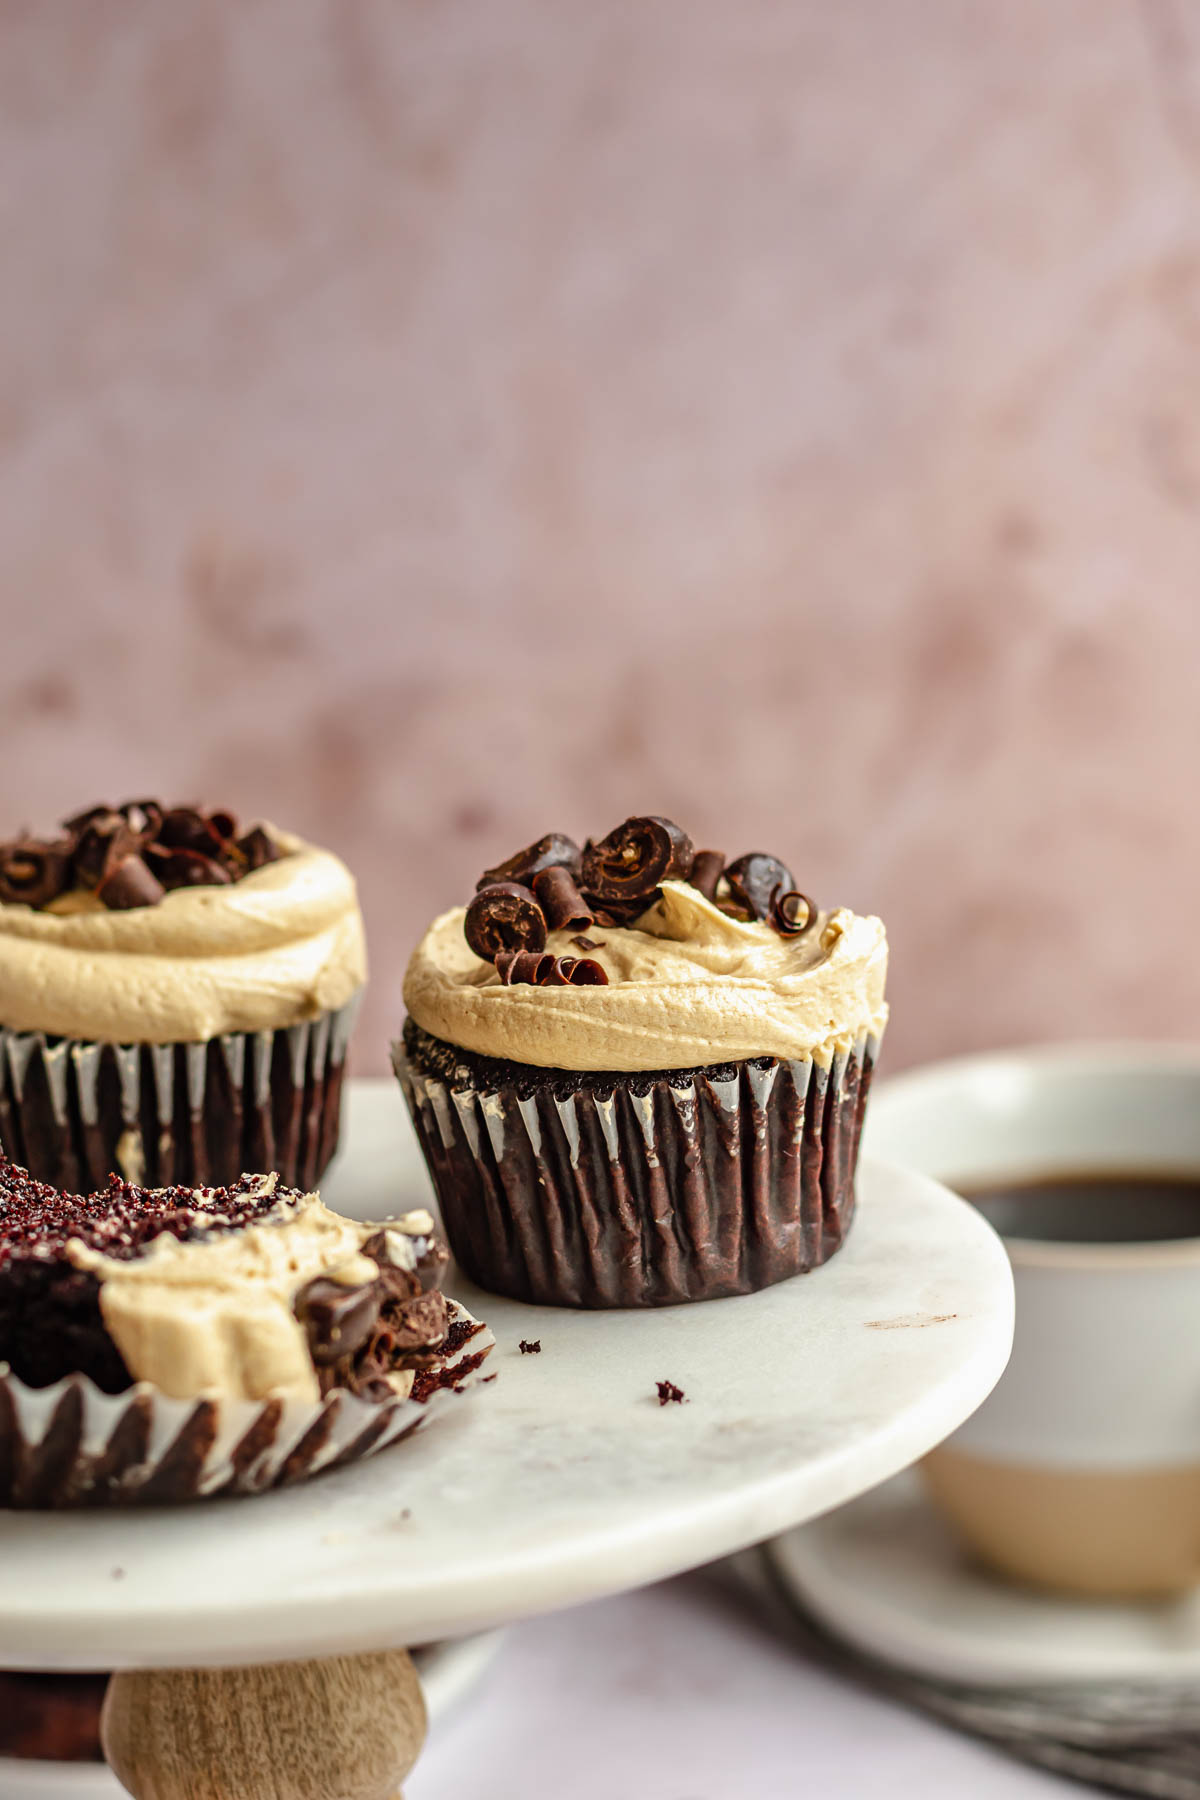 Chocolate coffee cupcakes on a small cake stand.